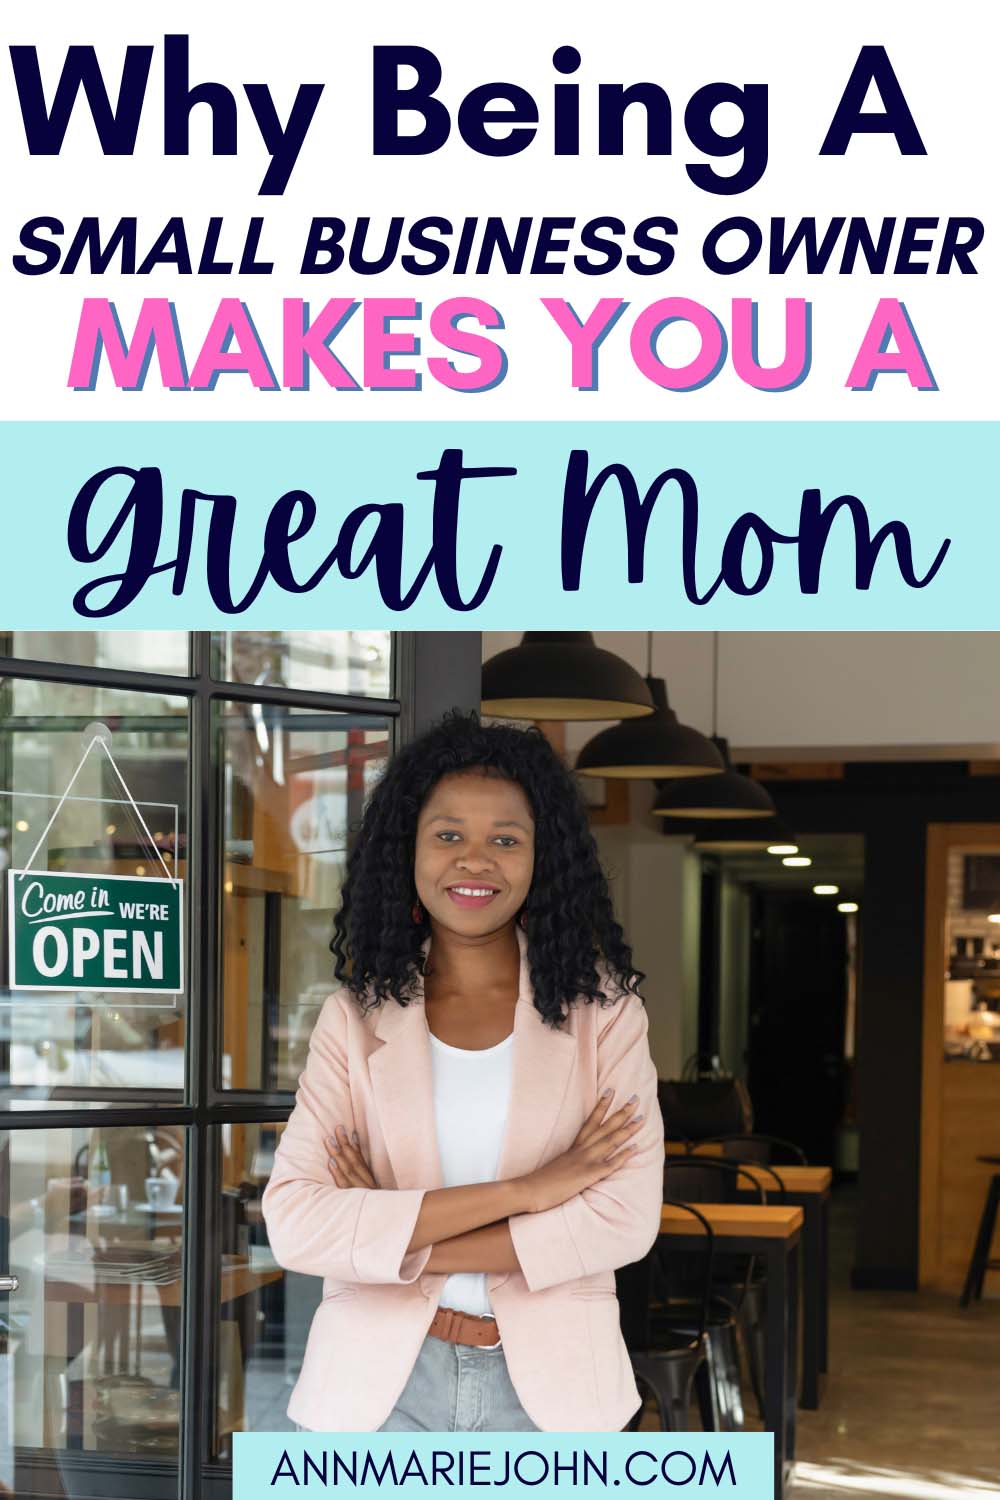 Why Being a Small Business Owner Makes You a Great Mom